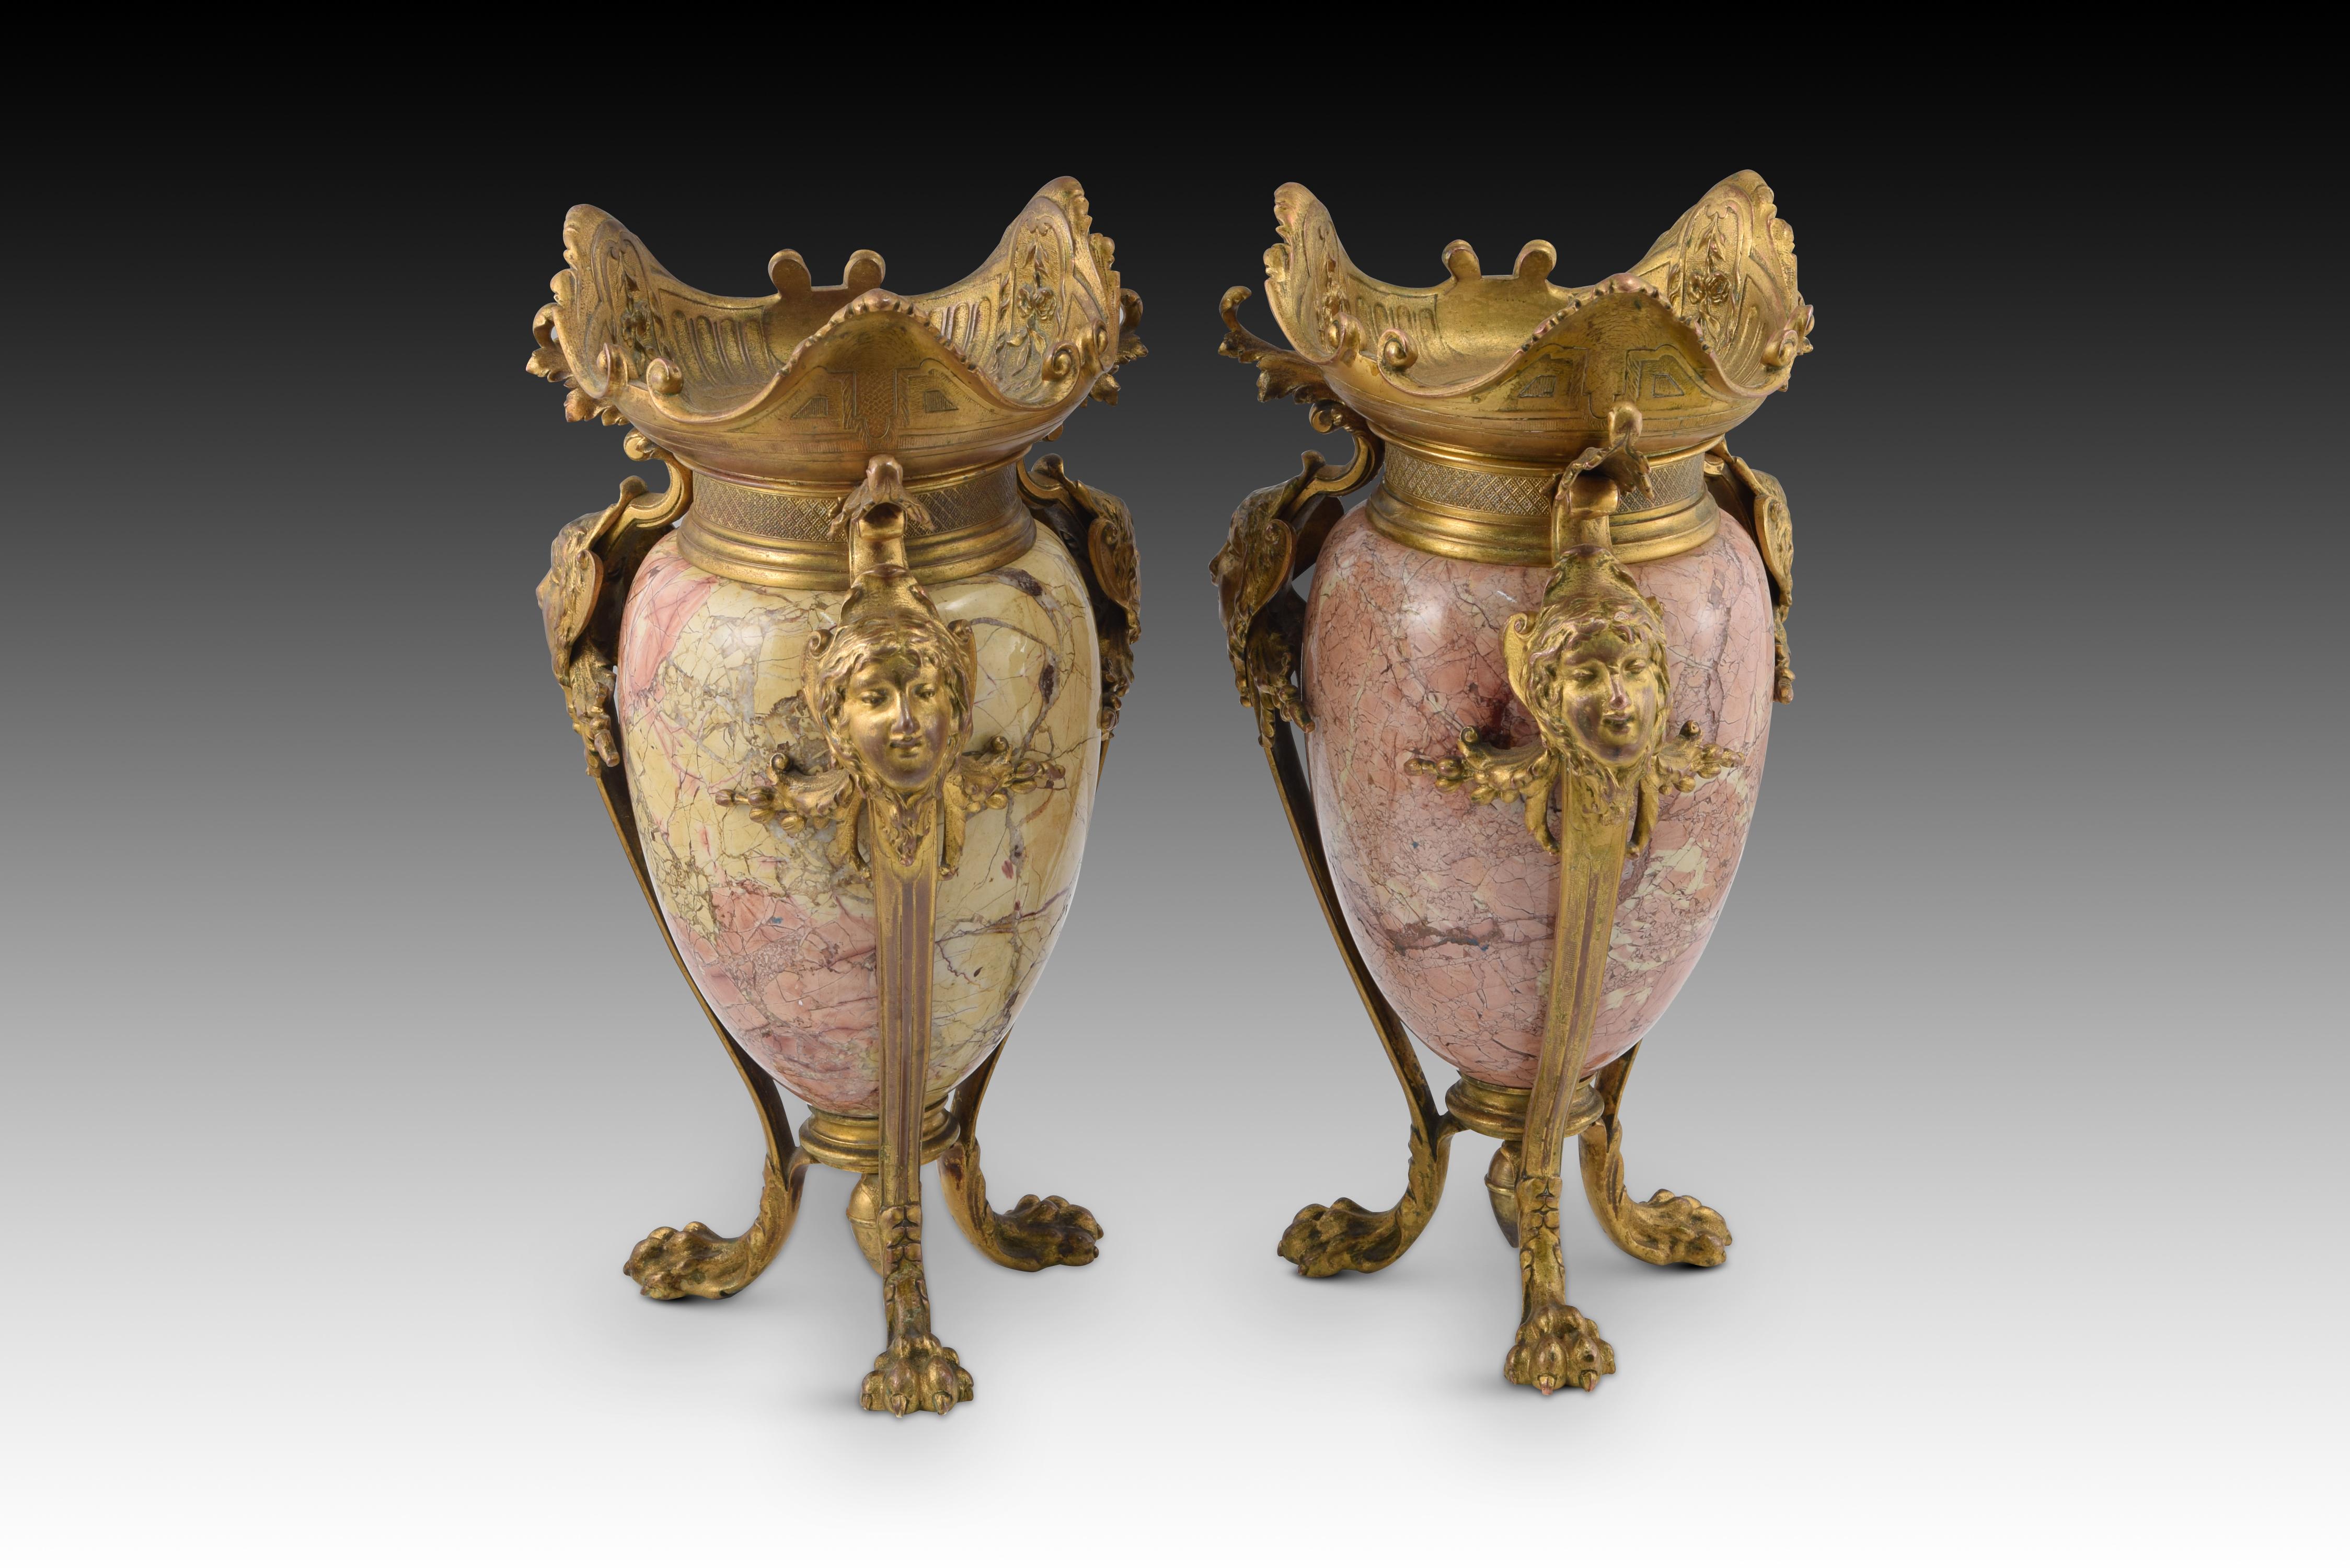 Pair of vases. Gilded bronze, veined marble. France, late 19th century 
Pair of centerpieces or vases that have an oval body carved in marble veined in pink tones (of a type very similar to one that was highly prized and often used in French school